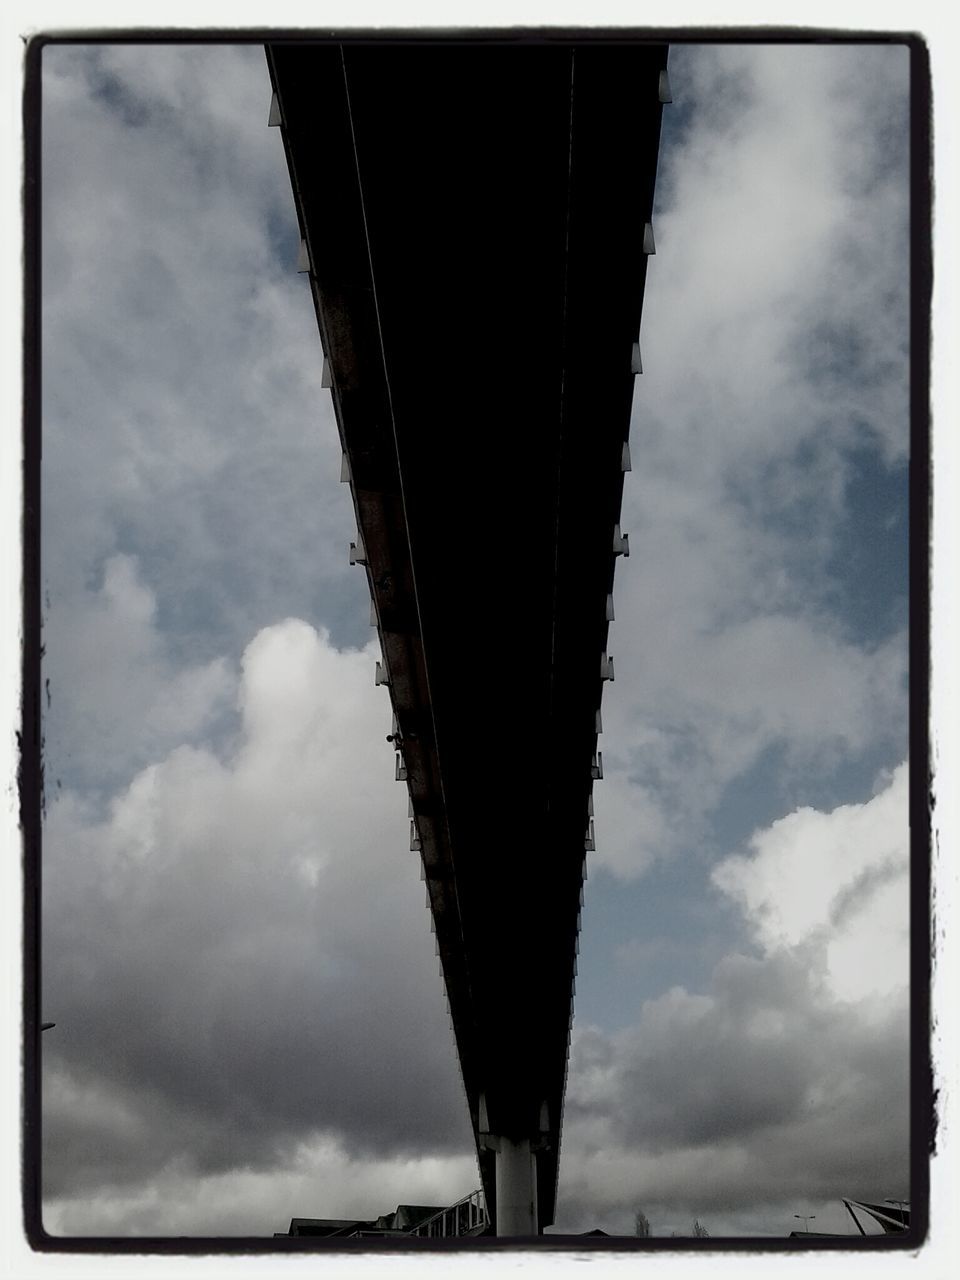 sky, low angle view, transfer print, architecture, built structure, cloud - sky, cloudy, auto post production filter, cloud, connection, bridge - man made structure, building exterior, engineering, outdoors, day, weather, transportation, overcast, city, bridge